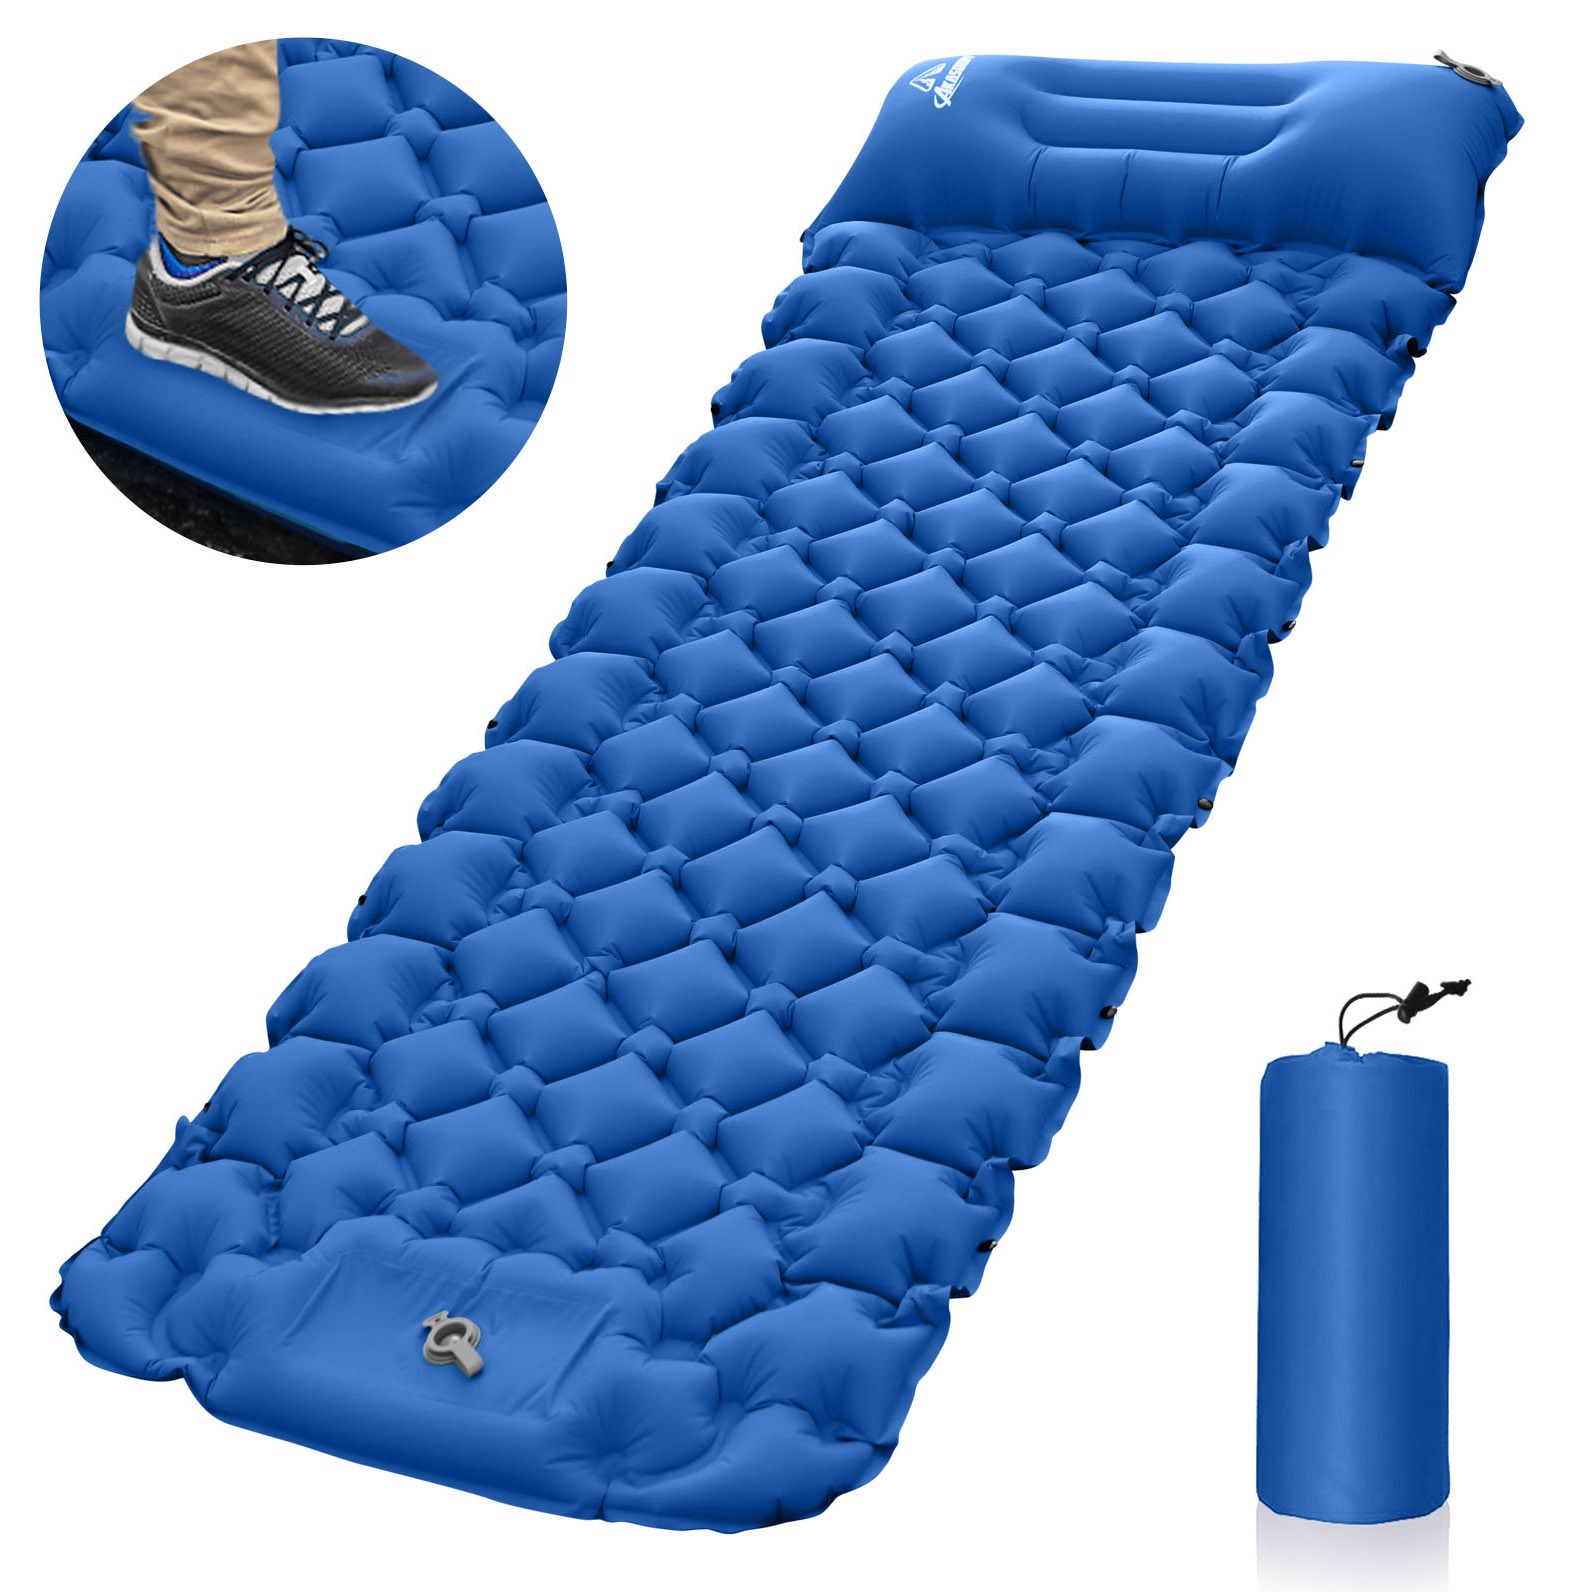 High Quality Sleeping Pad Mat with Built-in Pump Inflatable Sleeping Pad for Camping Hiking Backpacking